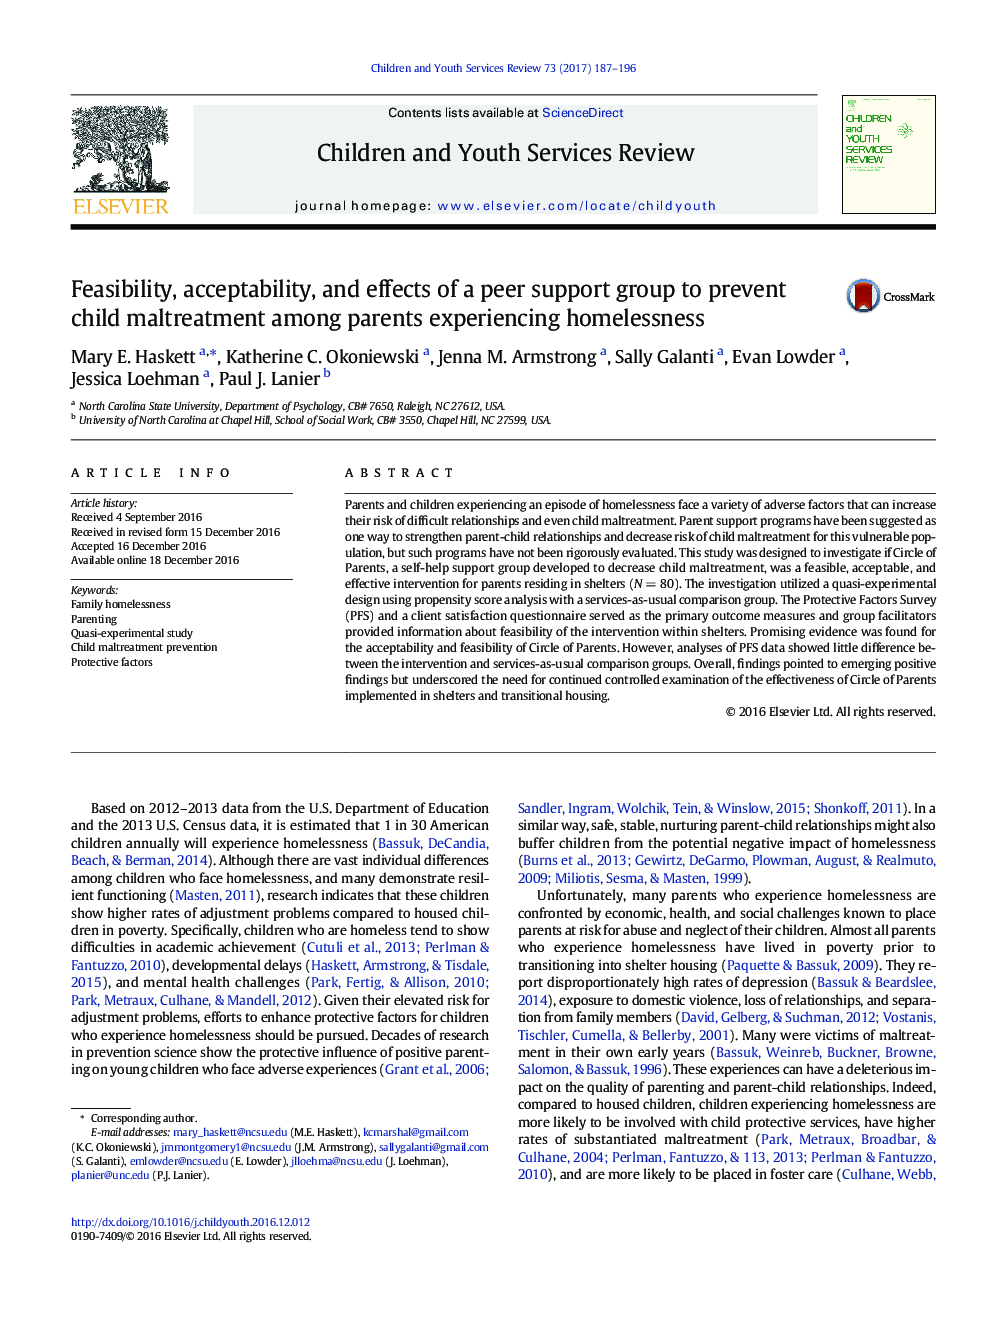 Feasibility, acceptability, and effects of a peer support group to prevent child maltreatment among parents experiencing homelessness